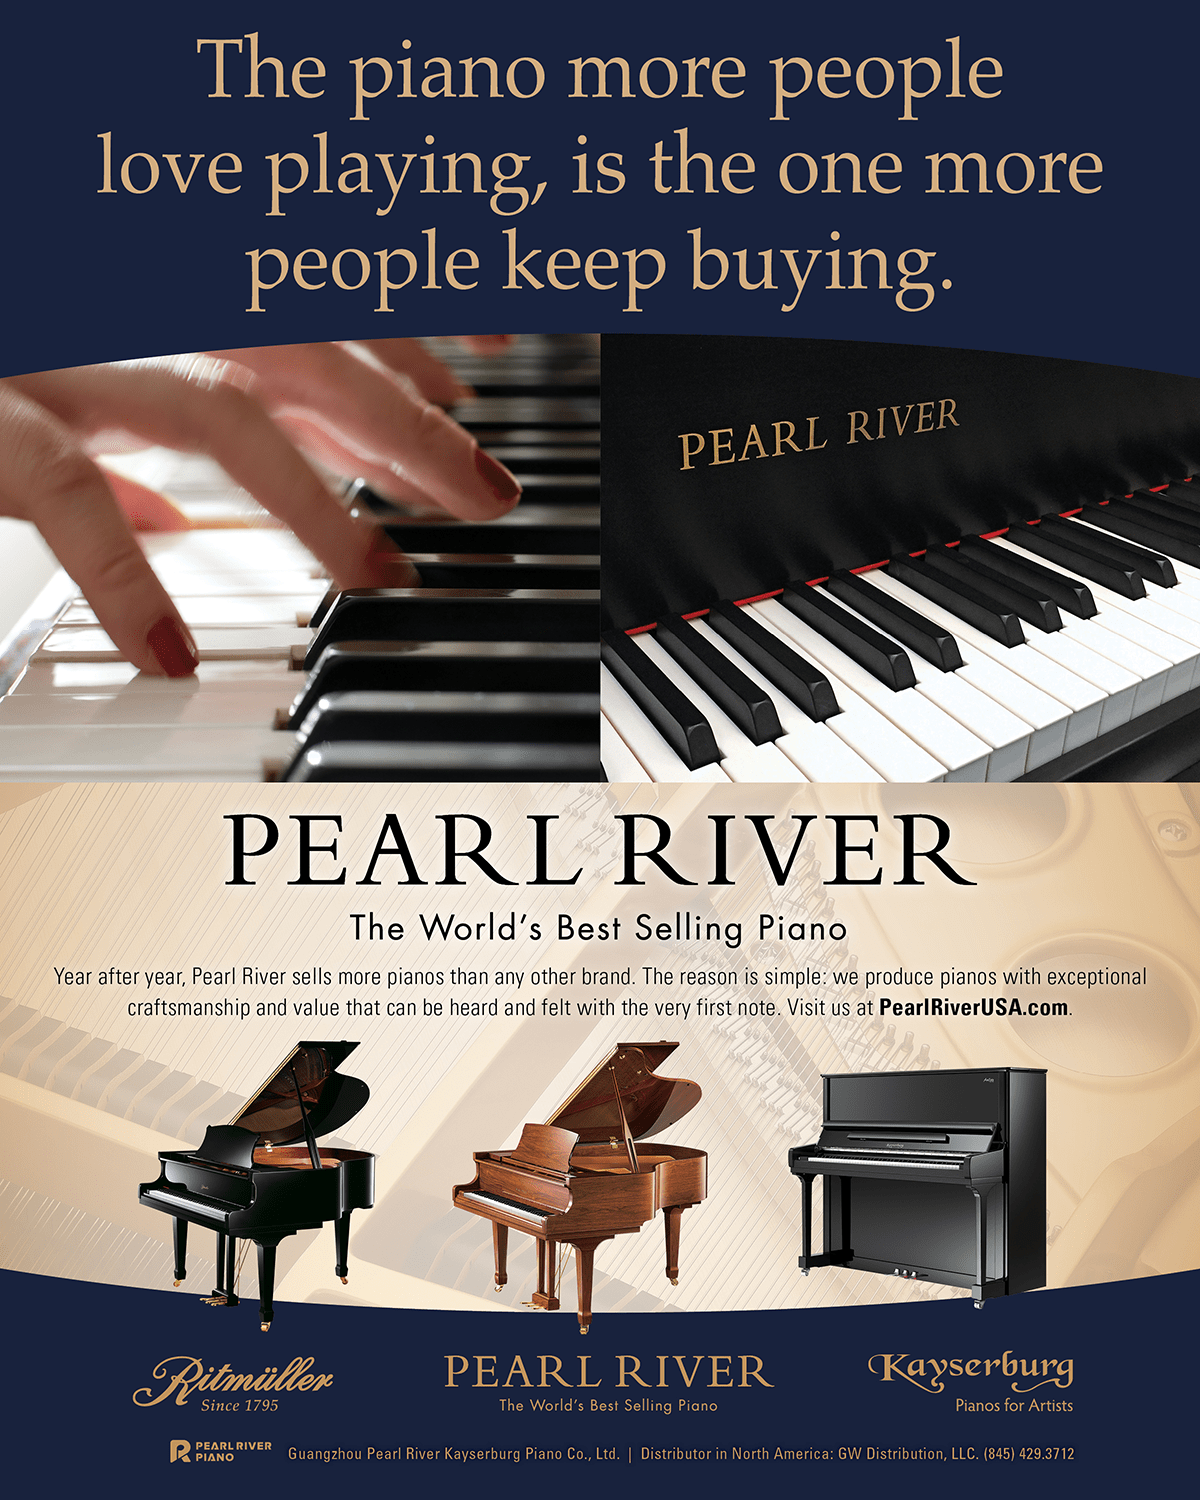 Pearl River, the World's Best Selling Piano